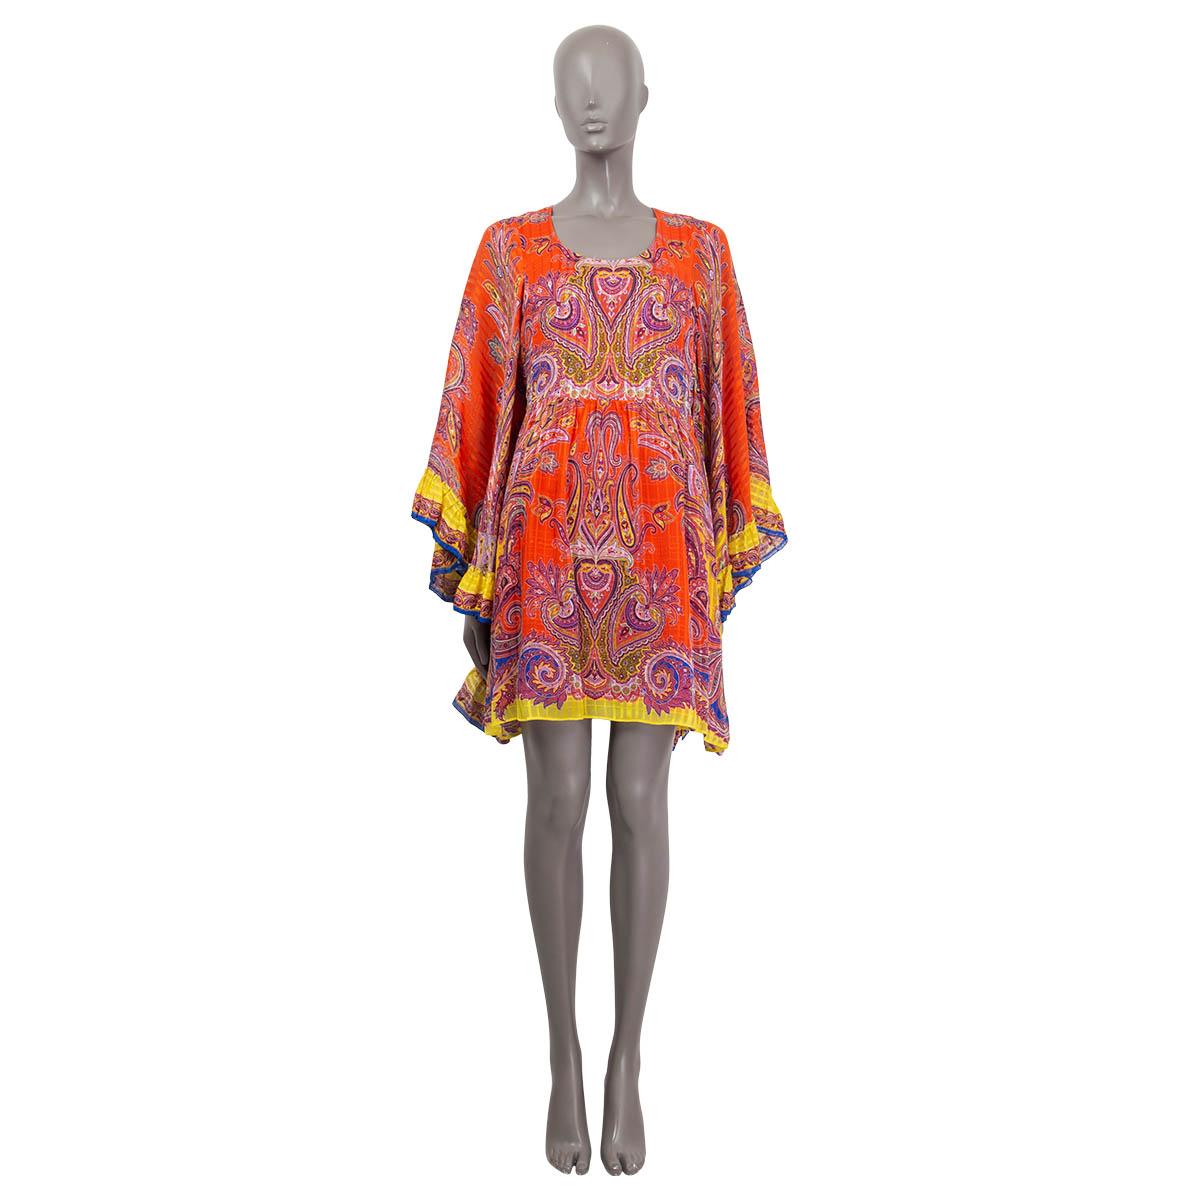 100% authentic Etro bell-sleeve dress in orange, yellow, blue, purple, lilac, green silk (100%) with a round neck. Closes on the back with a zipper. Lined in silk (100%). Has been worn and is in excellent condition. 

Measurements
Tag